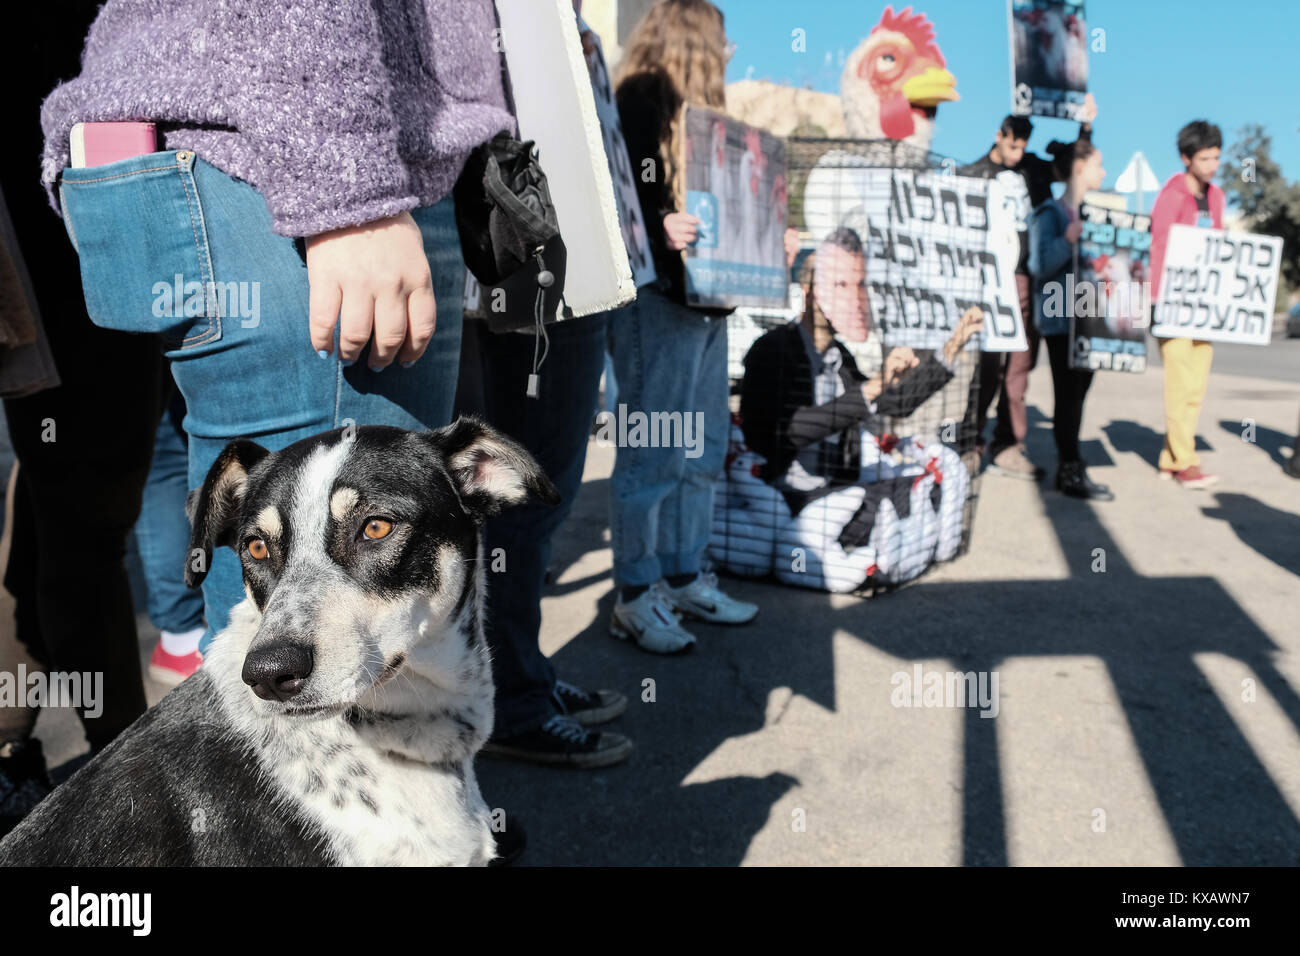 Jerusalem, Israel. 9th January, 2018. Animal rights activists stage a rally outside the Ministry of Finance protesting the Ministry's intention of raising quotas and investing taxpayers' money in the egg industry with continued use of battery cages for egg laying hens. A Minister of Finance, Kahlon, mask wearing protester sits in a cage with stuffed hens alongside a chicken costume wearing protester. Credit: Nir Alon/Alamy Live News Stock Photo